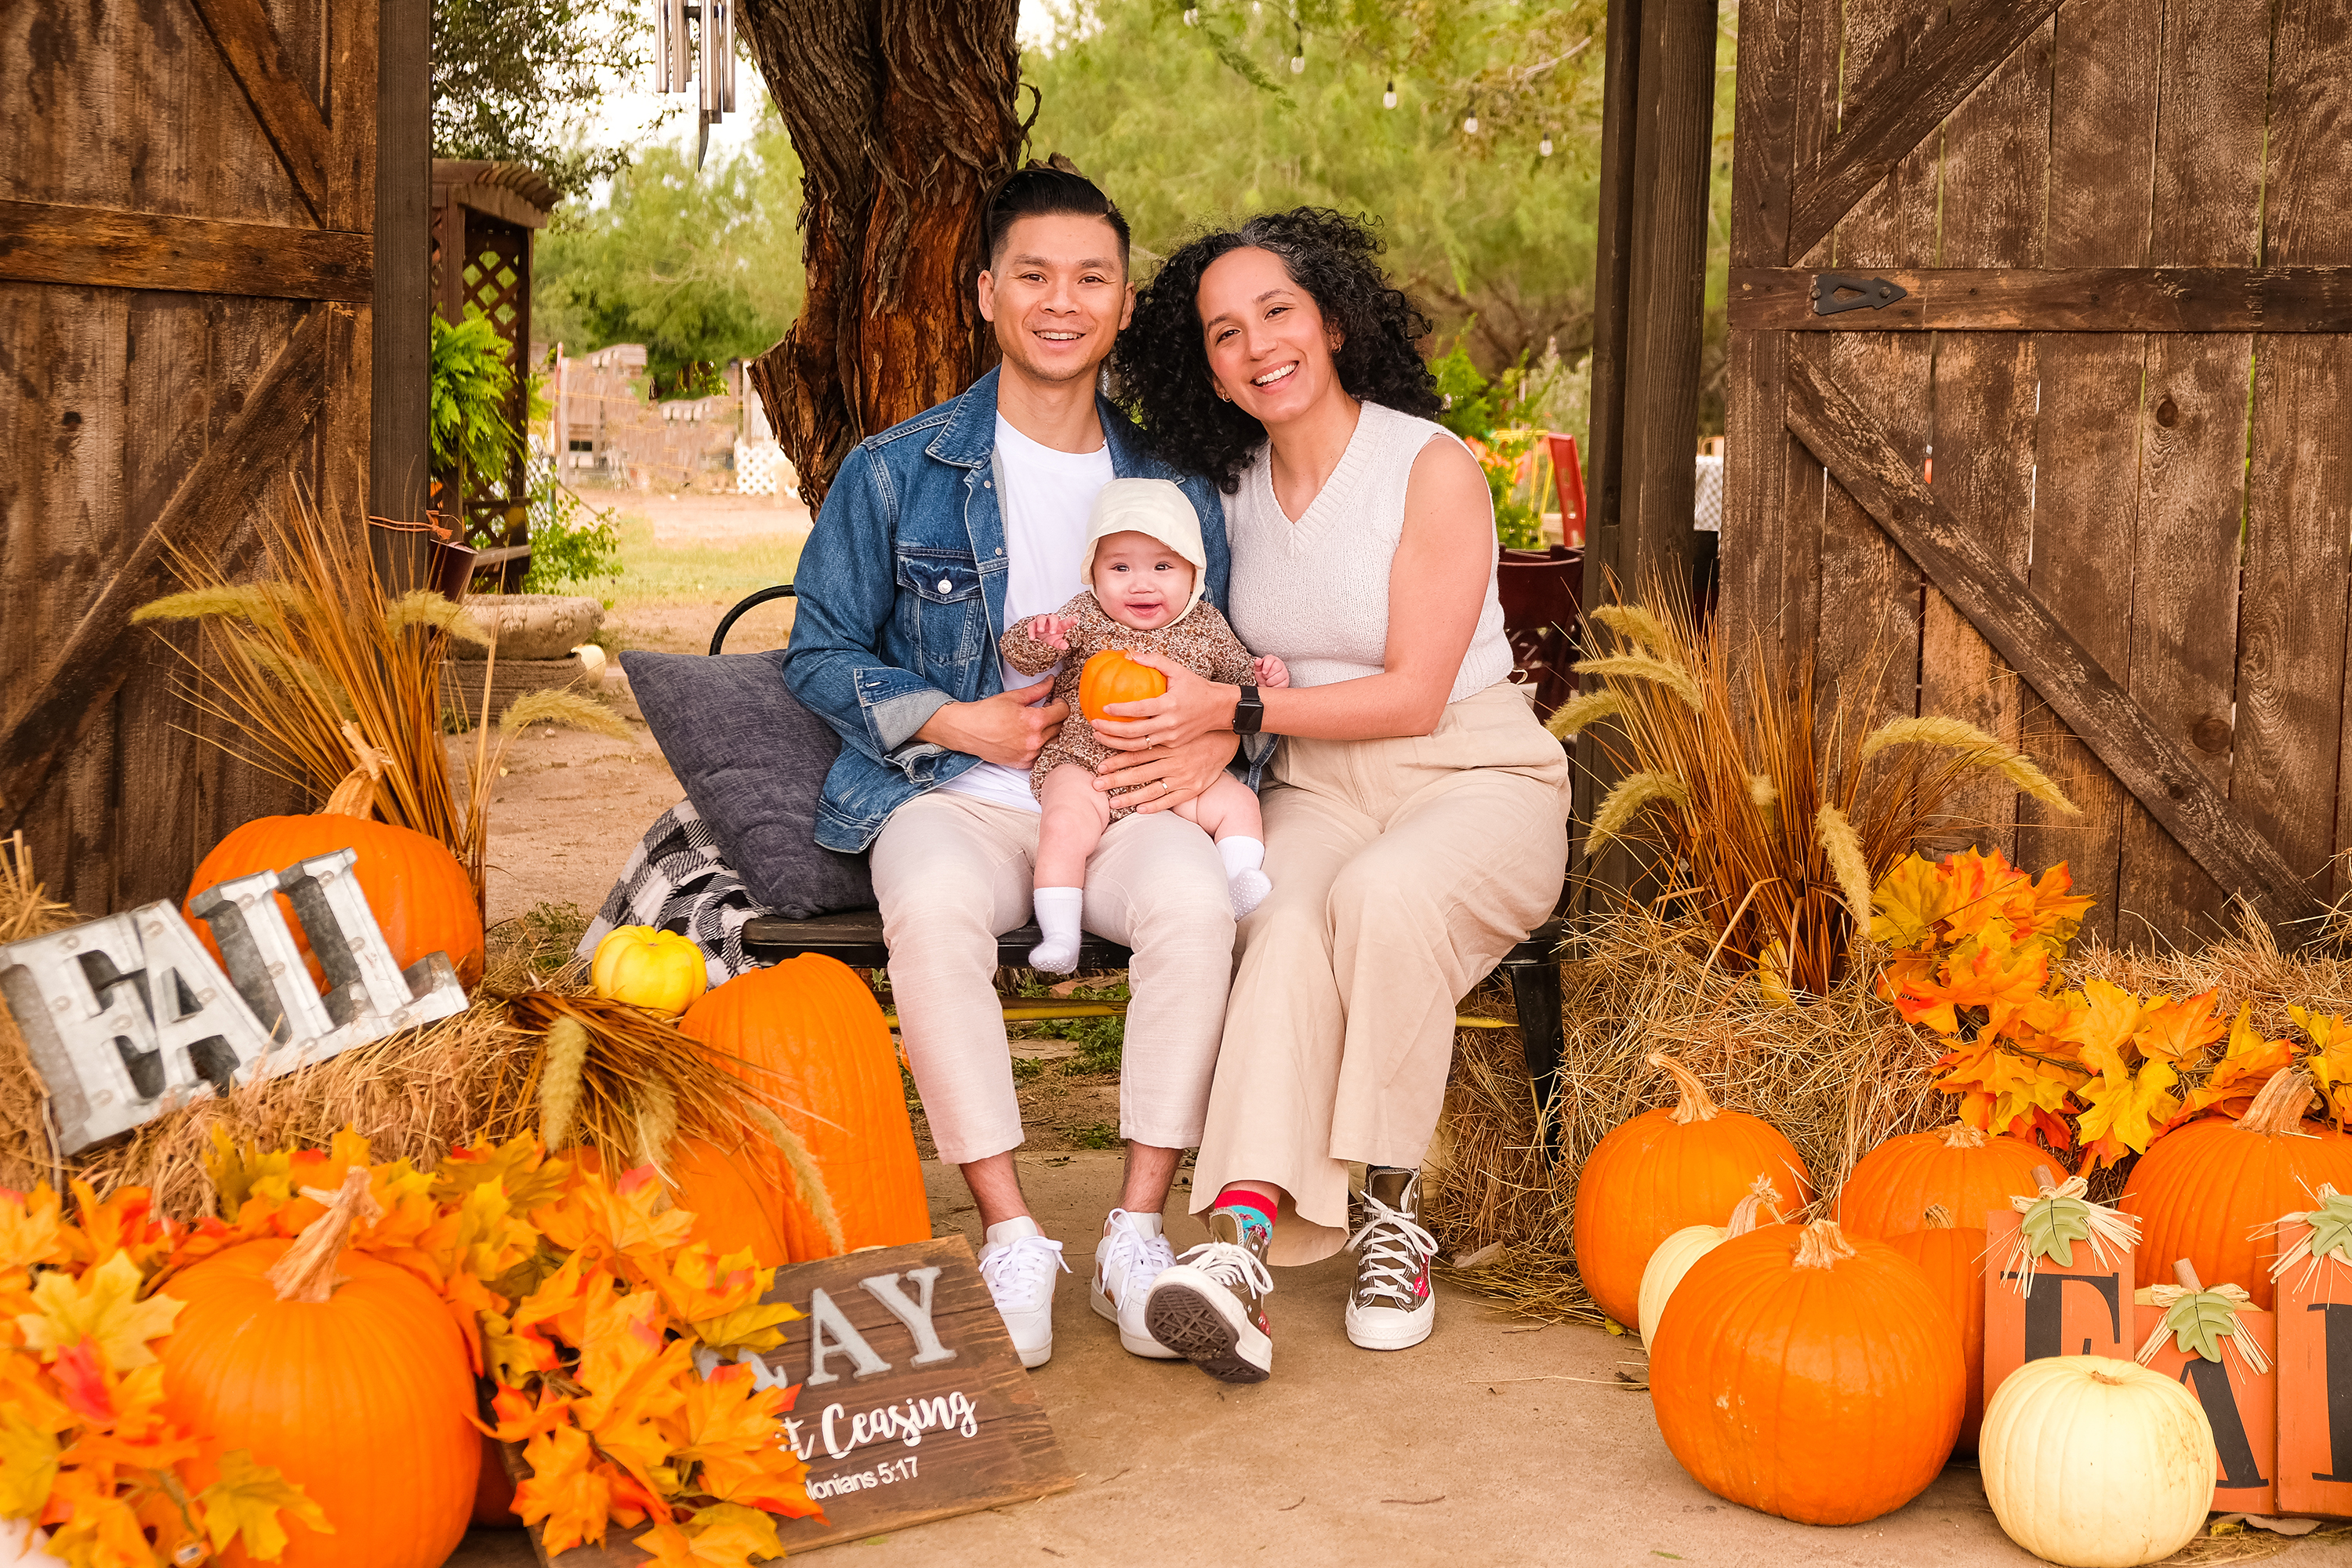 What to expect at a Pumpkin Patch